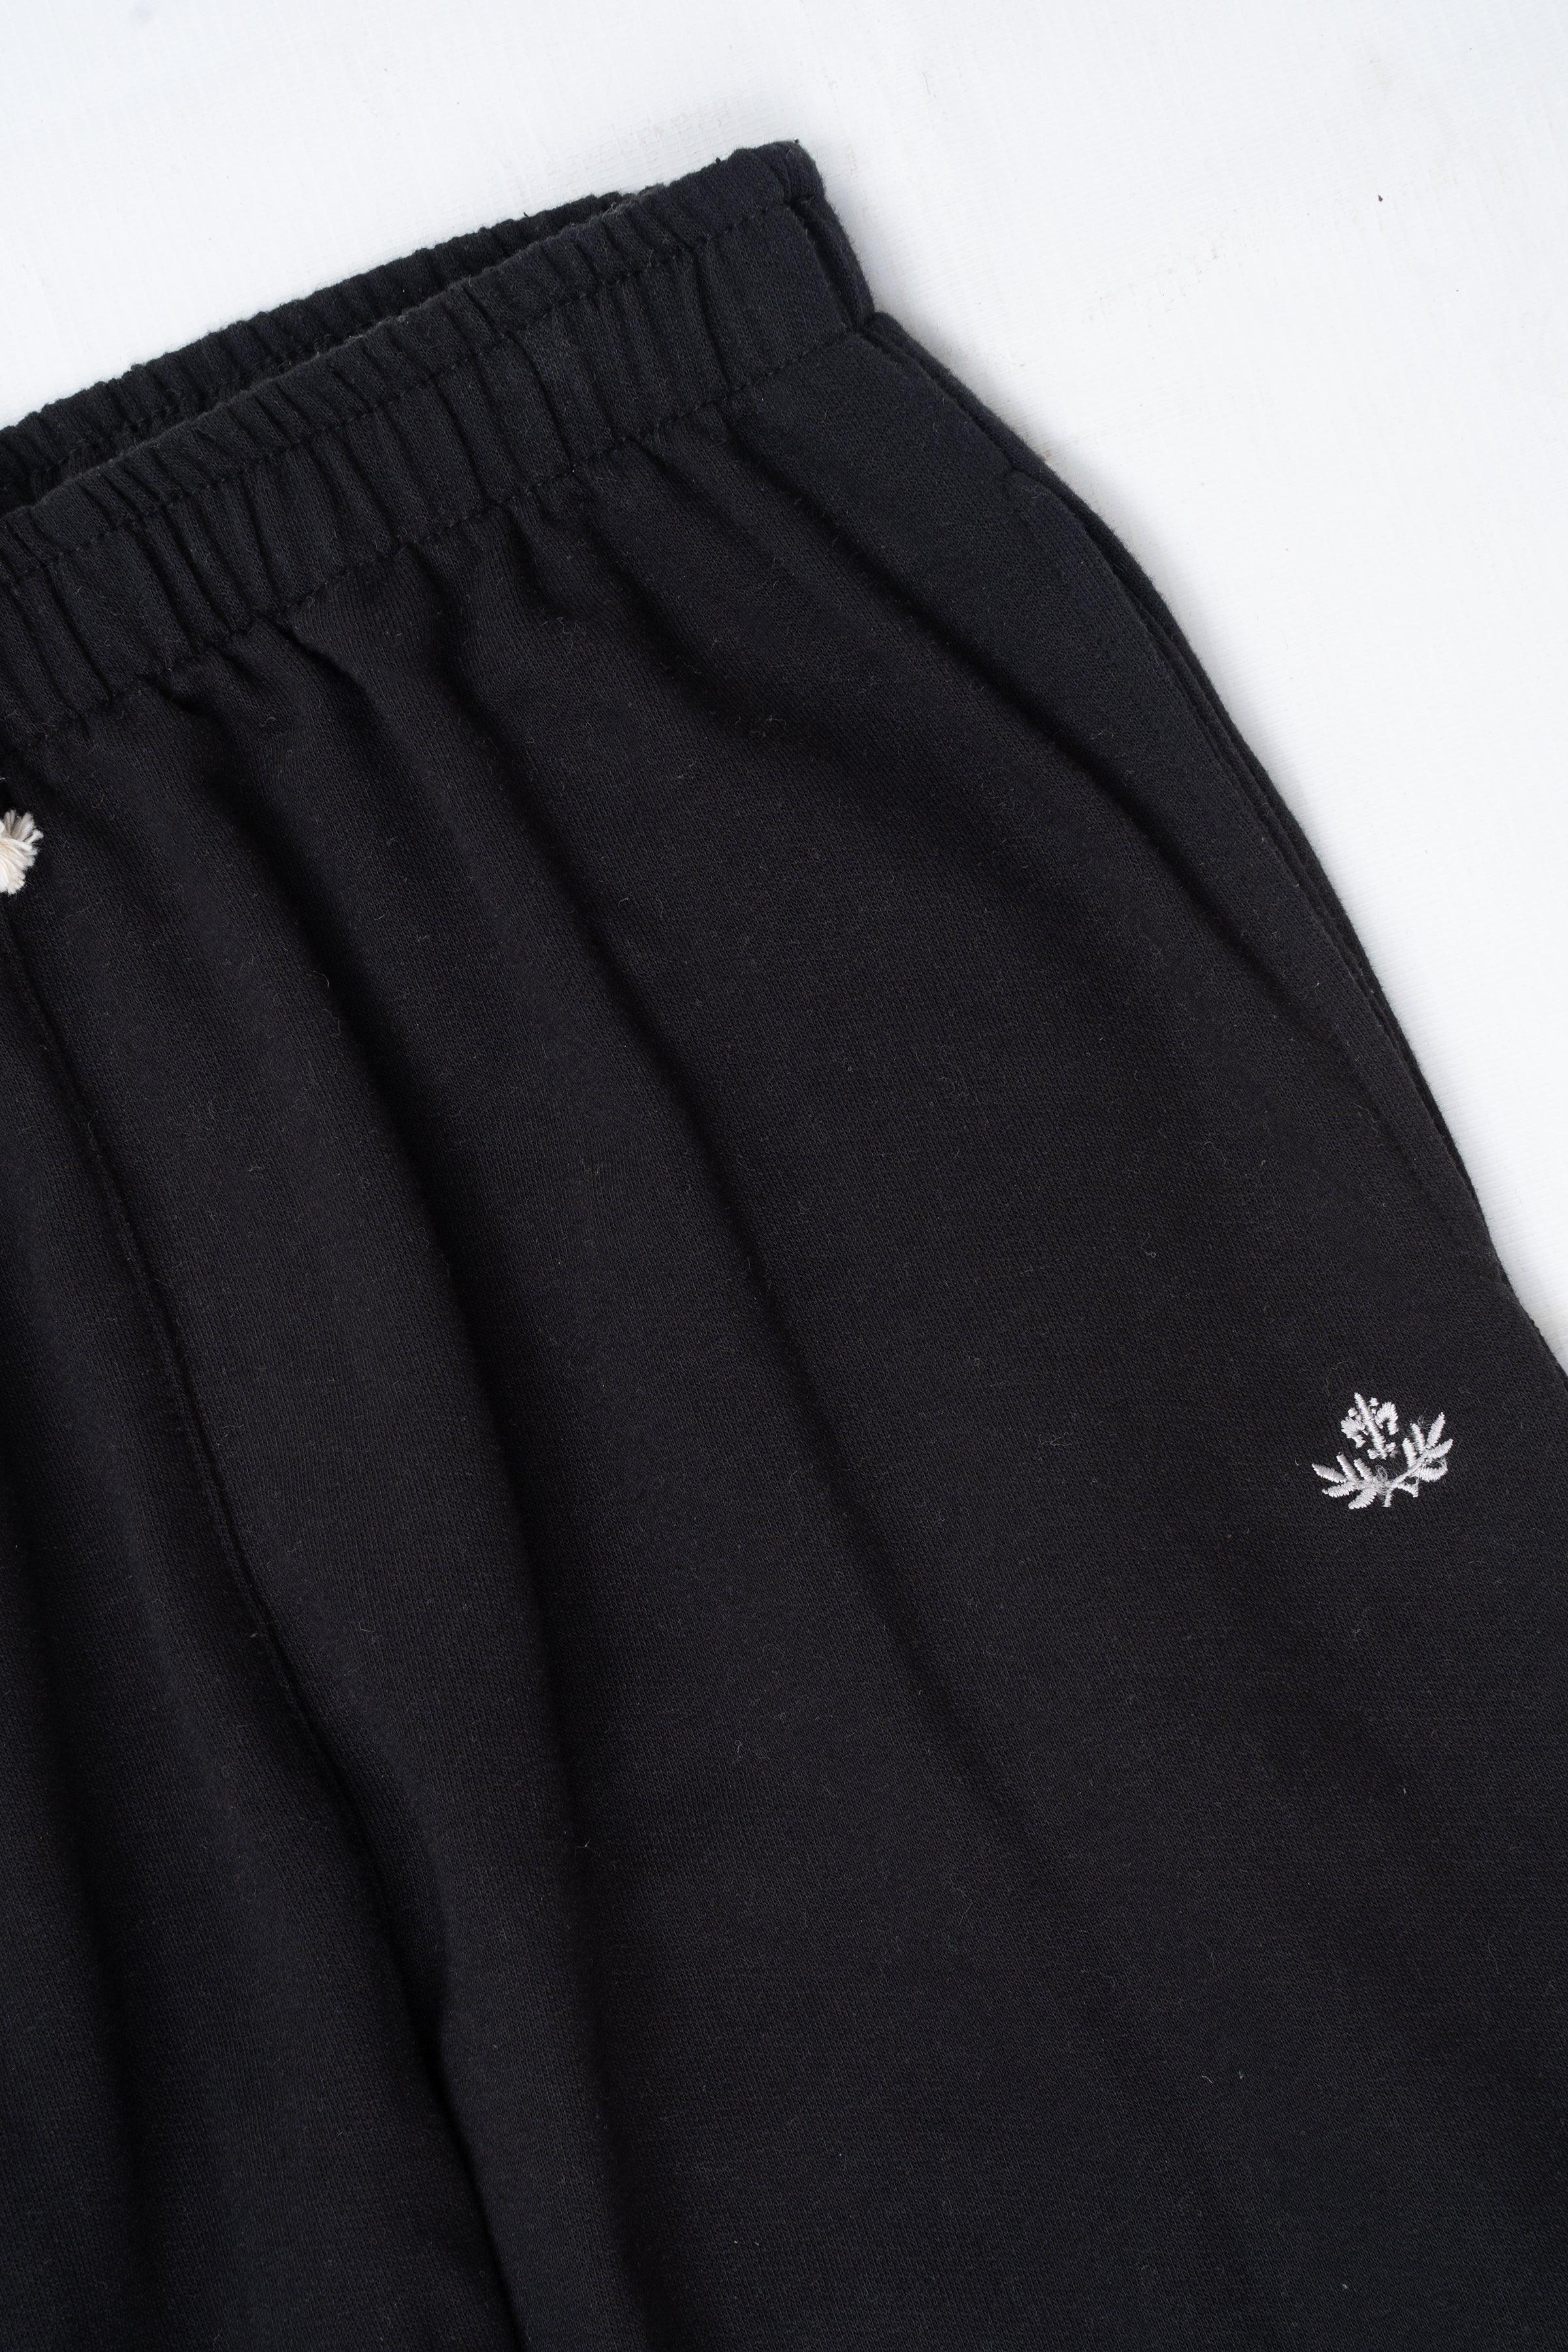 SLEEPWEAR TROUSER BLACK at Charcoal Clothing